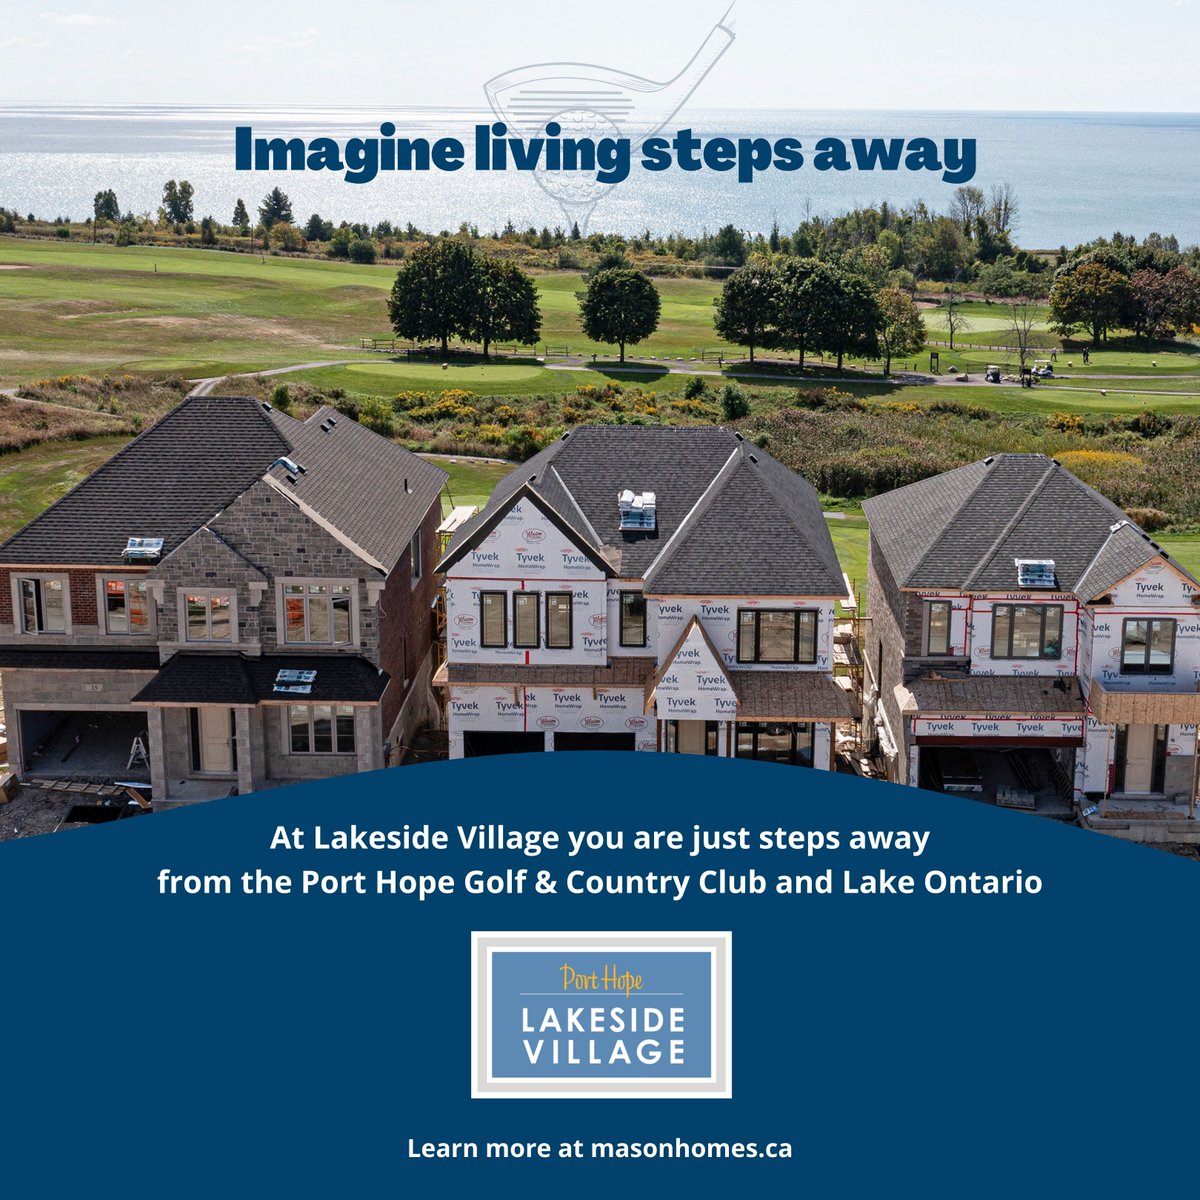 DYK: Lakeside Village in Port Hope is just steps away from the shores of Lake Ontario and the Port Hope Golf and Country Club?
Learn more at masonhomes.ca

#qualityliveshere #masonhomes  #porthope #lakesidevillage